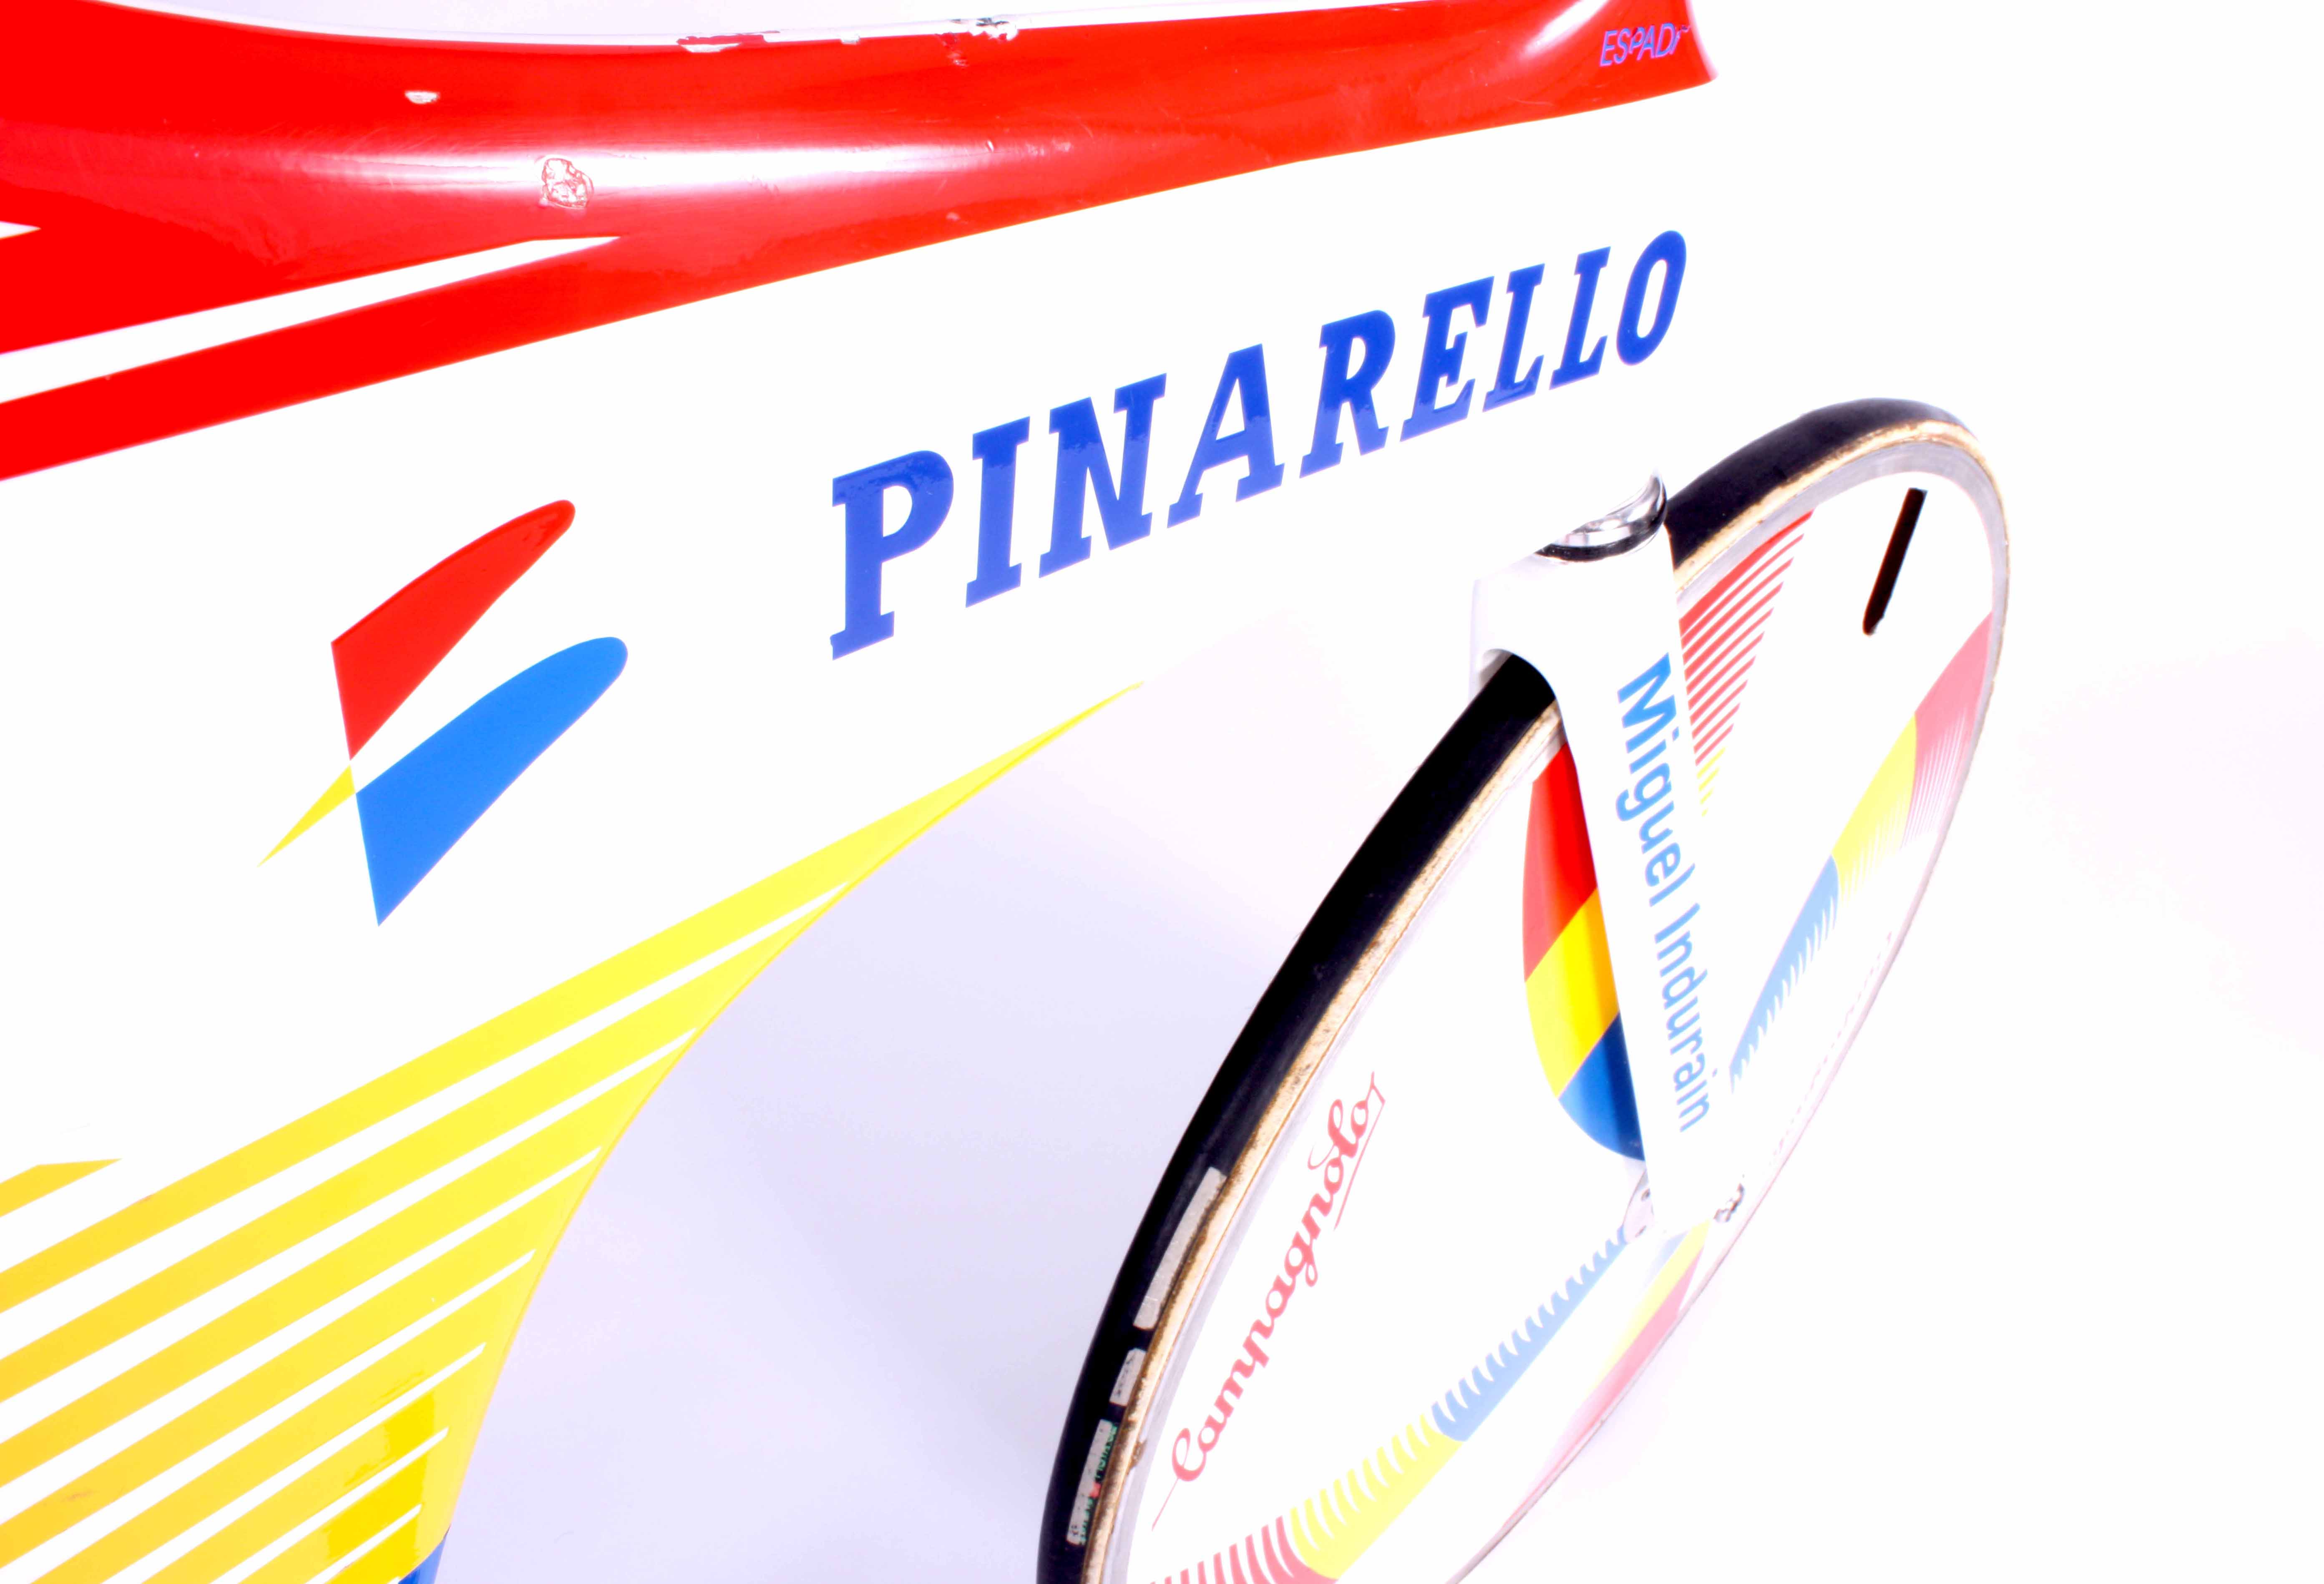 Exclusive: Louis Vuitton makes first creative changes to Pinarello